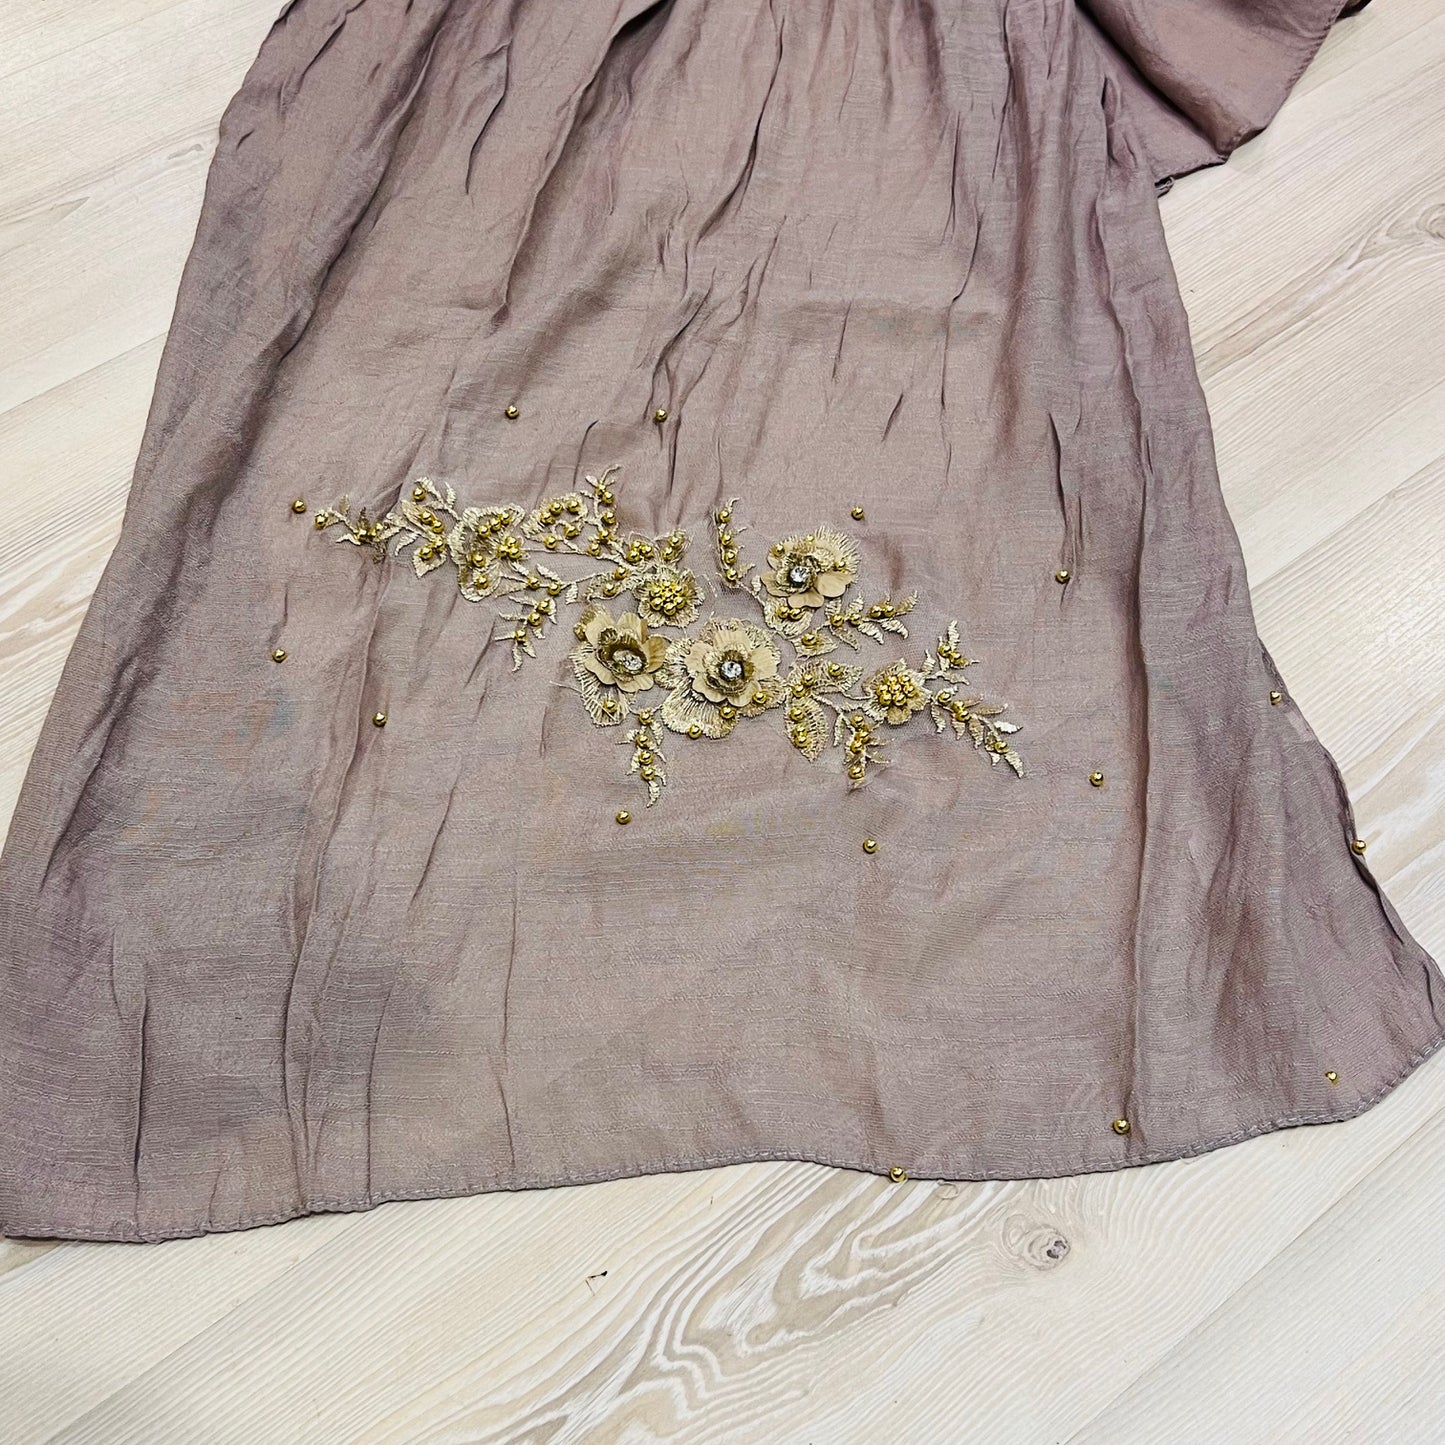 Vada: Mocha & gold floral embroidered scarf. One size